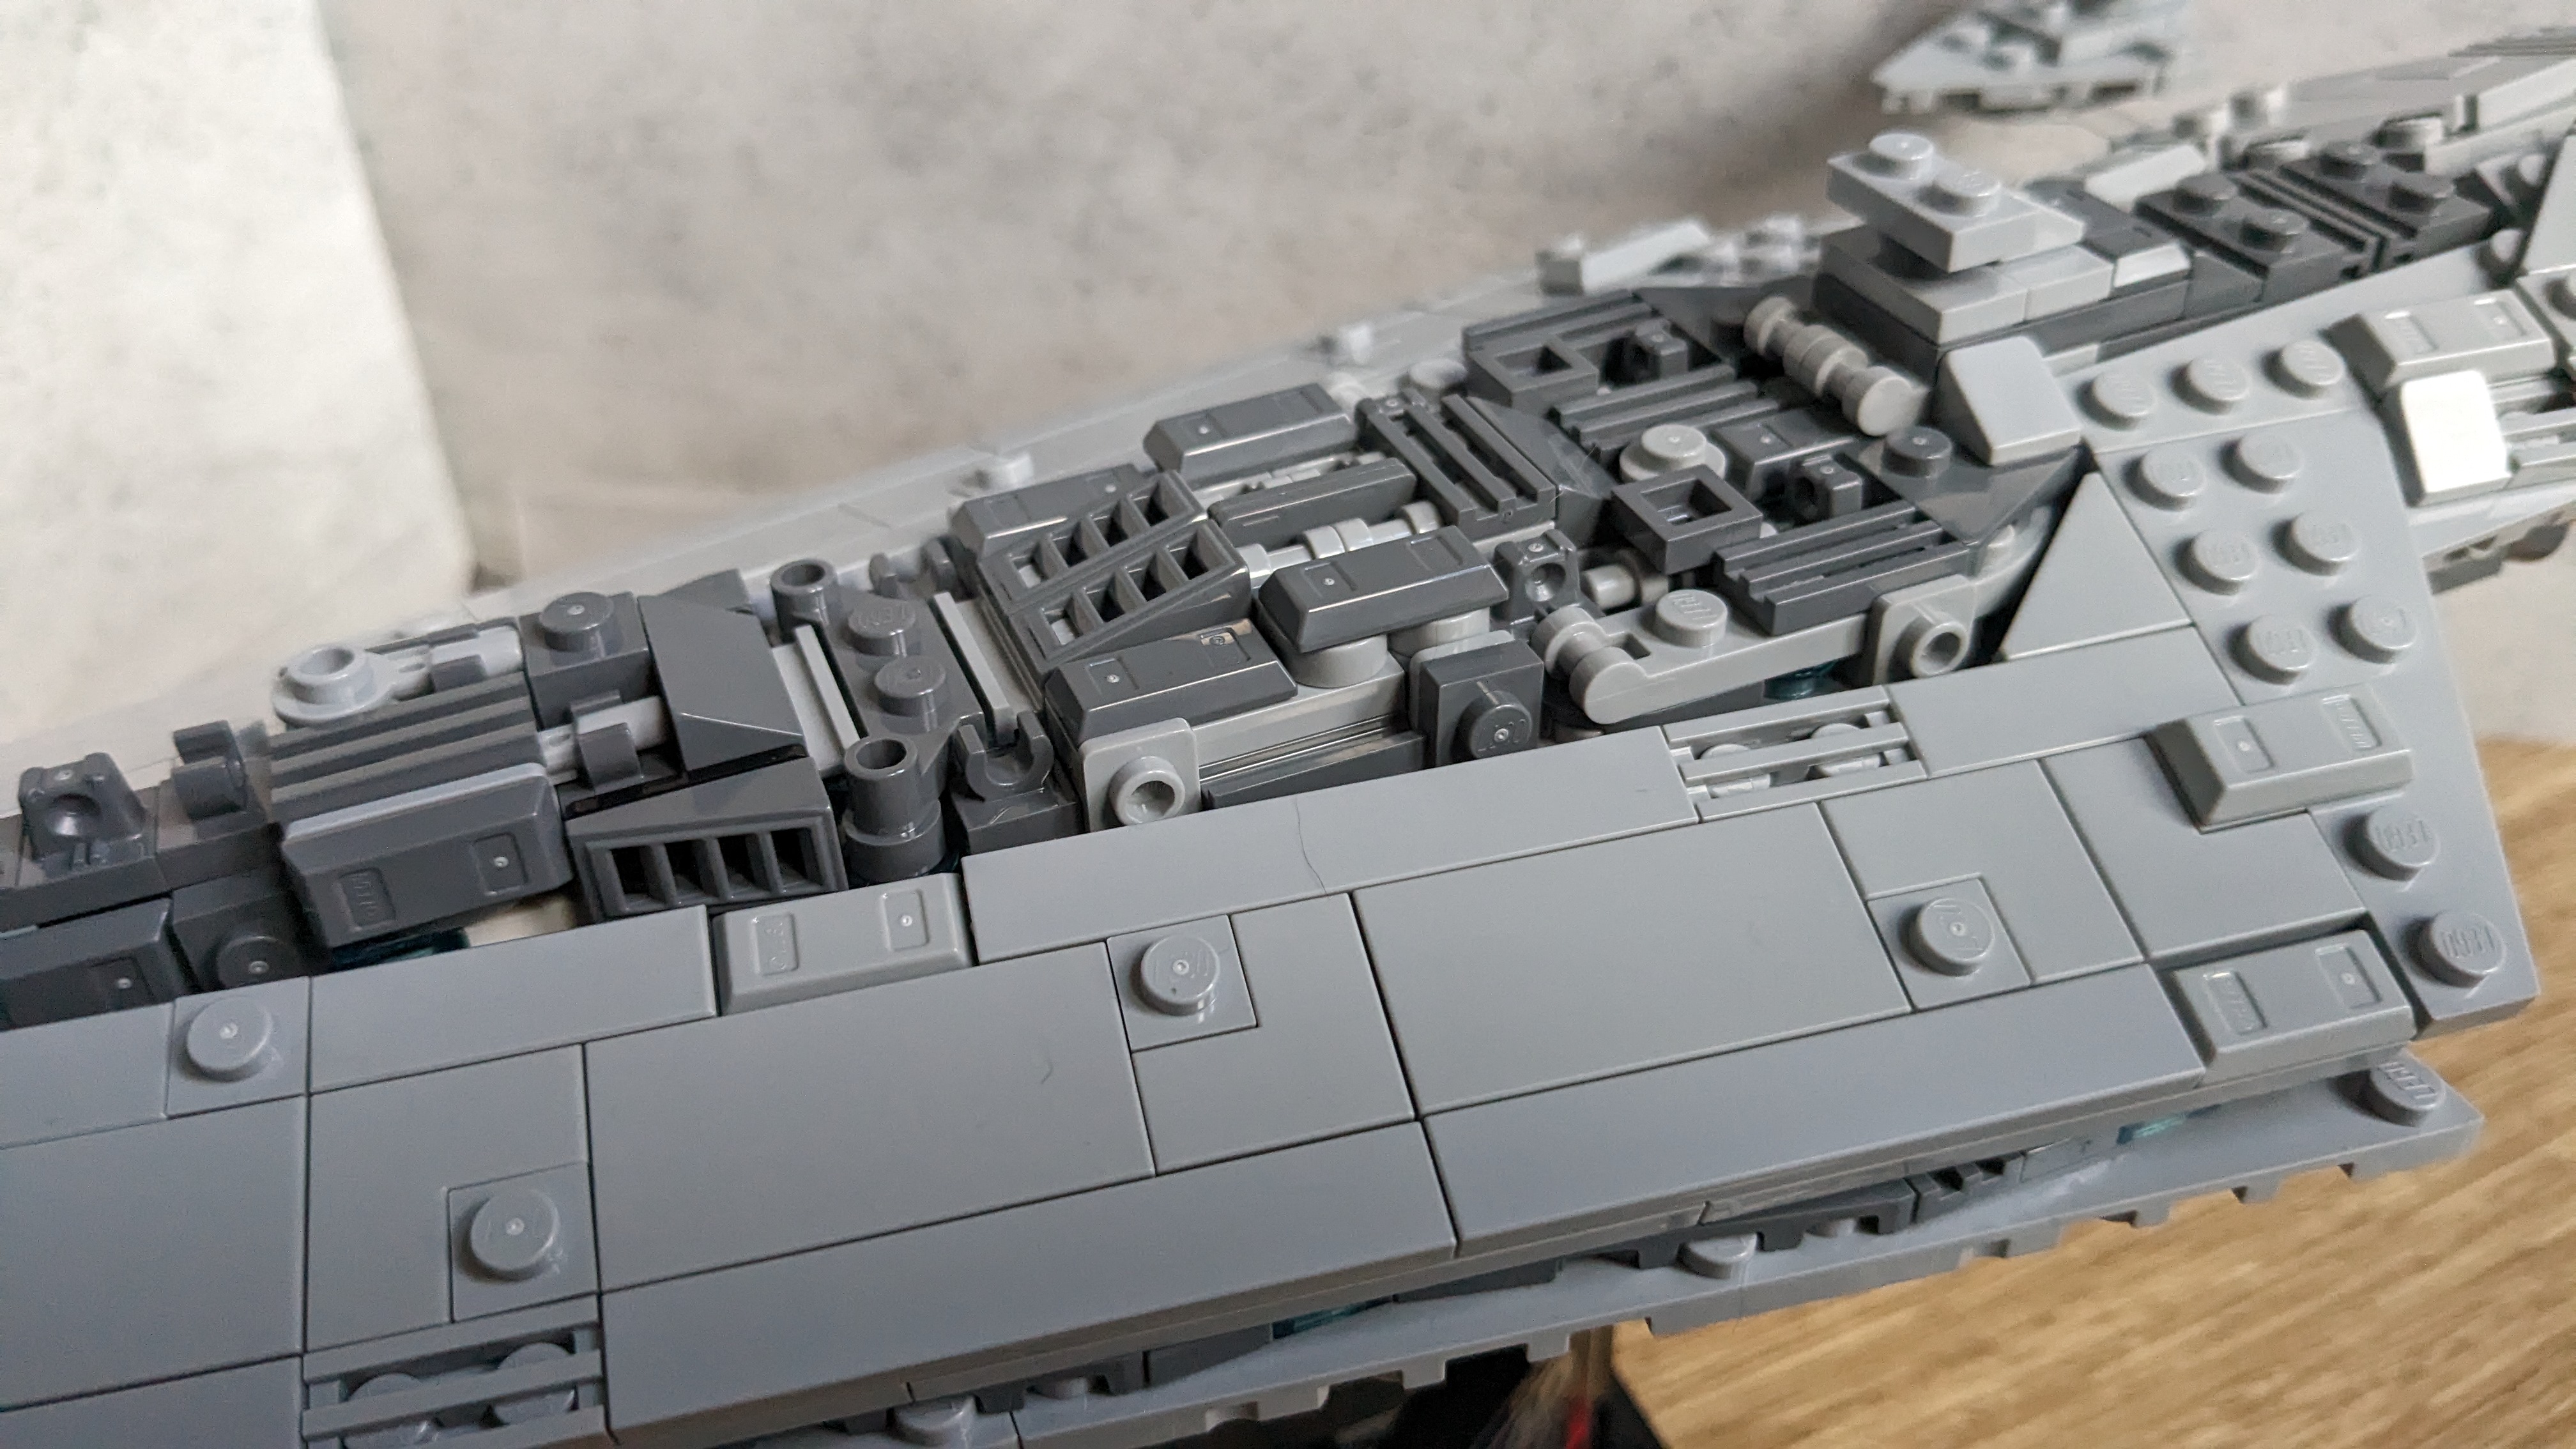 Up-close detail of the Executor Super Star Destroyer